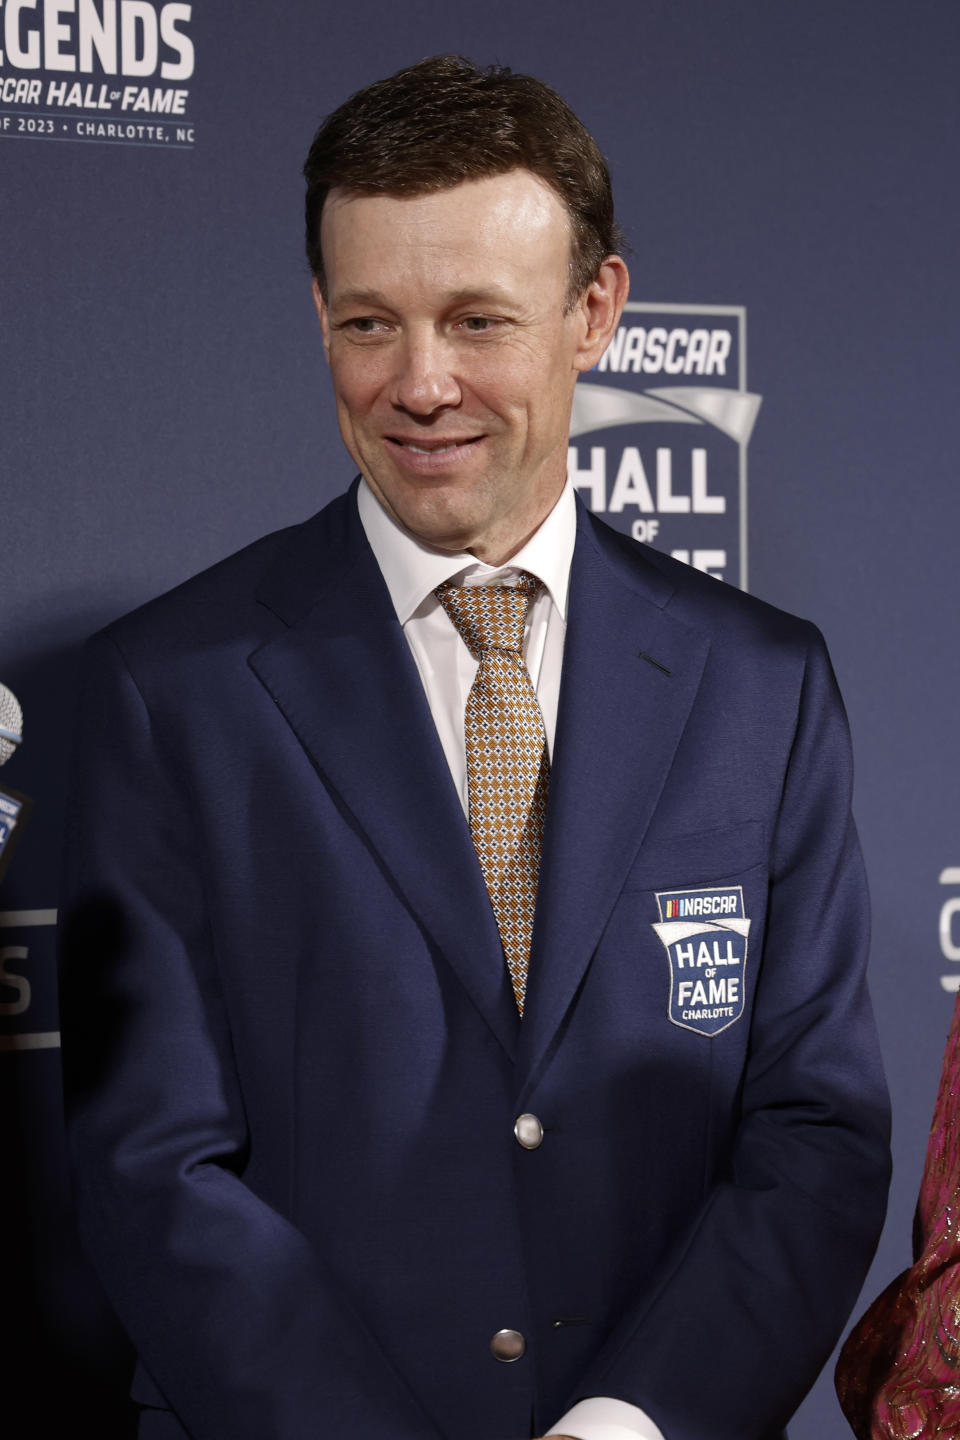 Matt Kenseth arrives for the NASCAR Hall of Fame inductions in Charlotte, N.C., Friday, Jan. 20, 2023. (AP Photo/Nell Redmond)